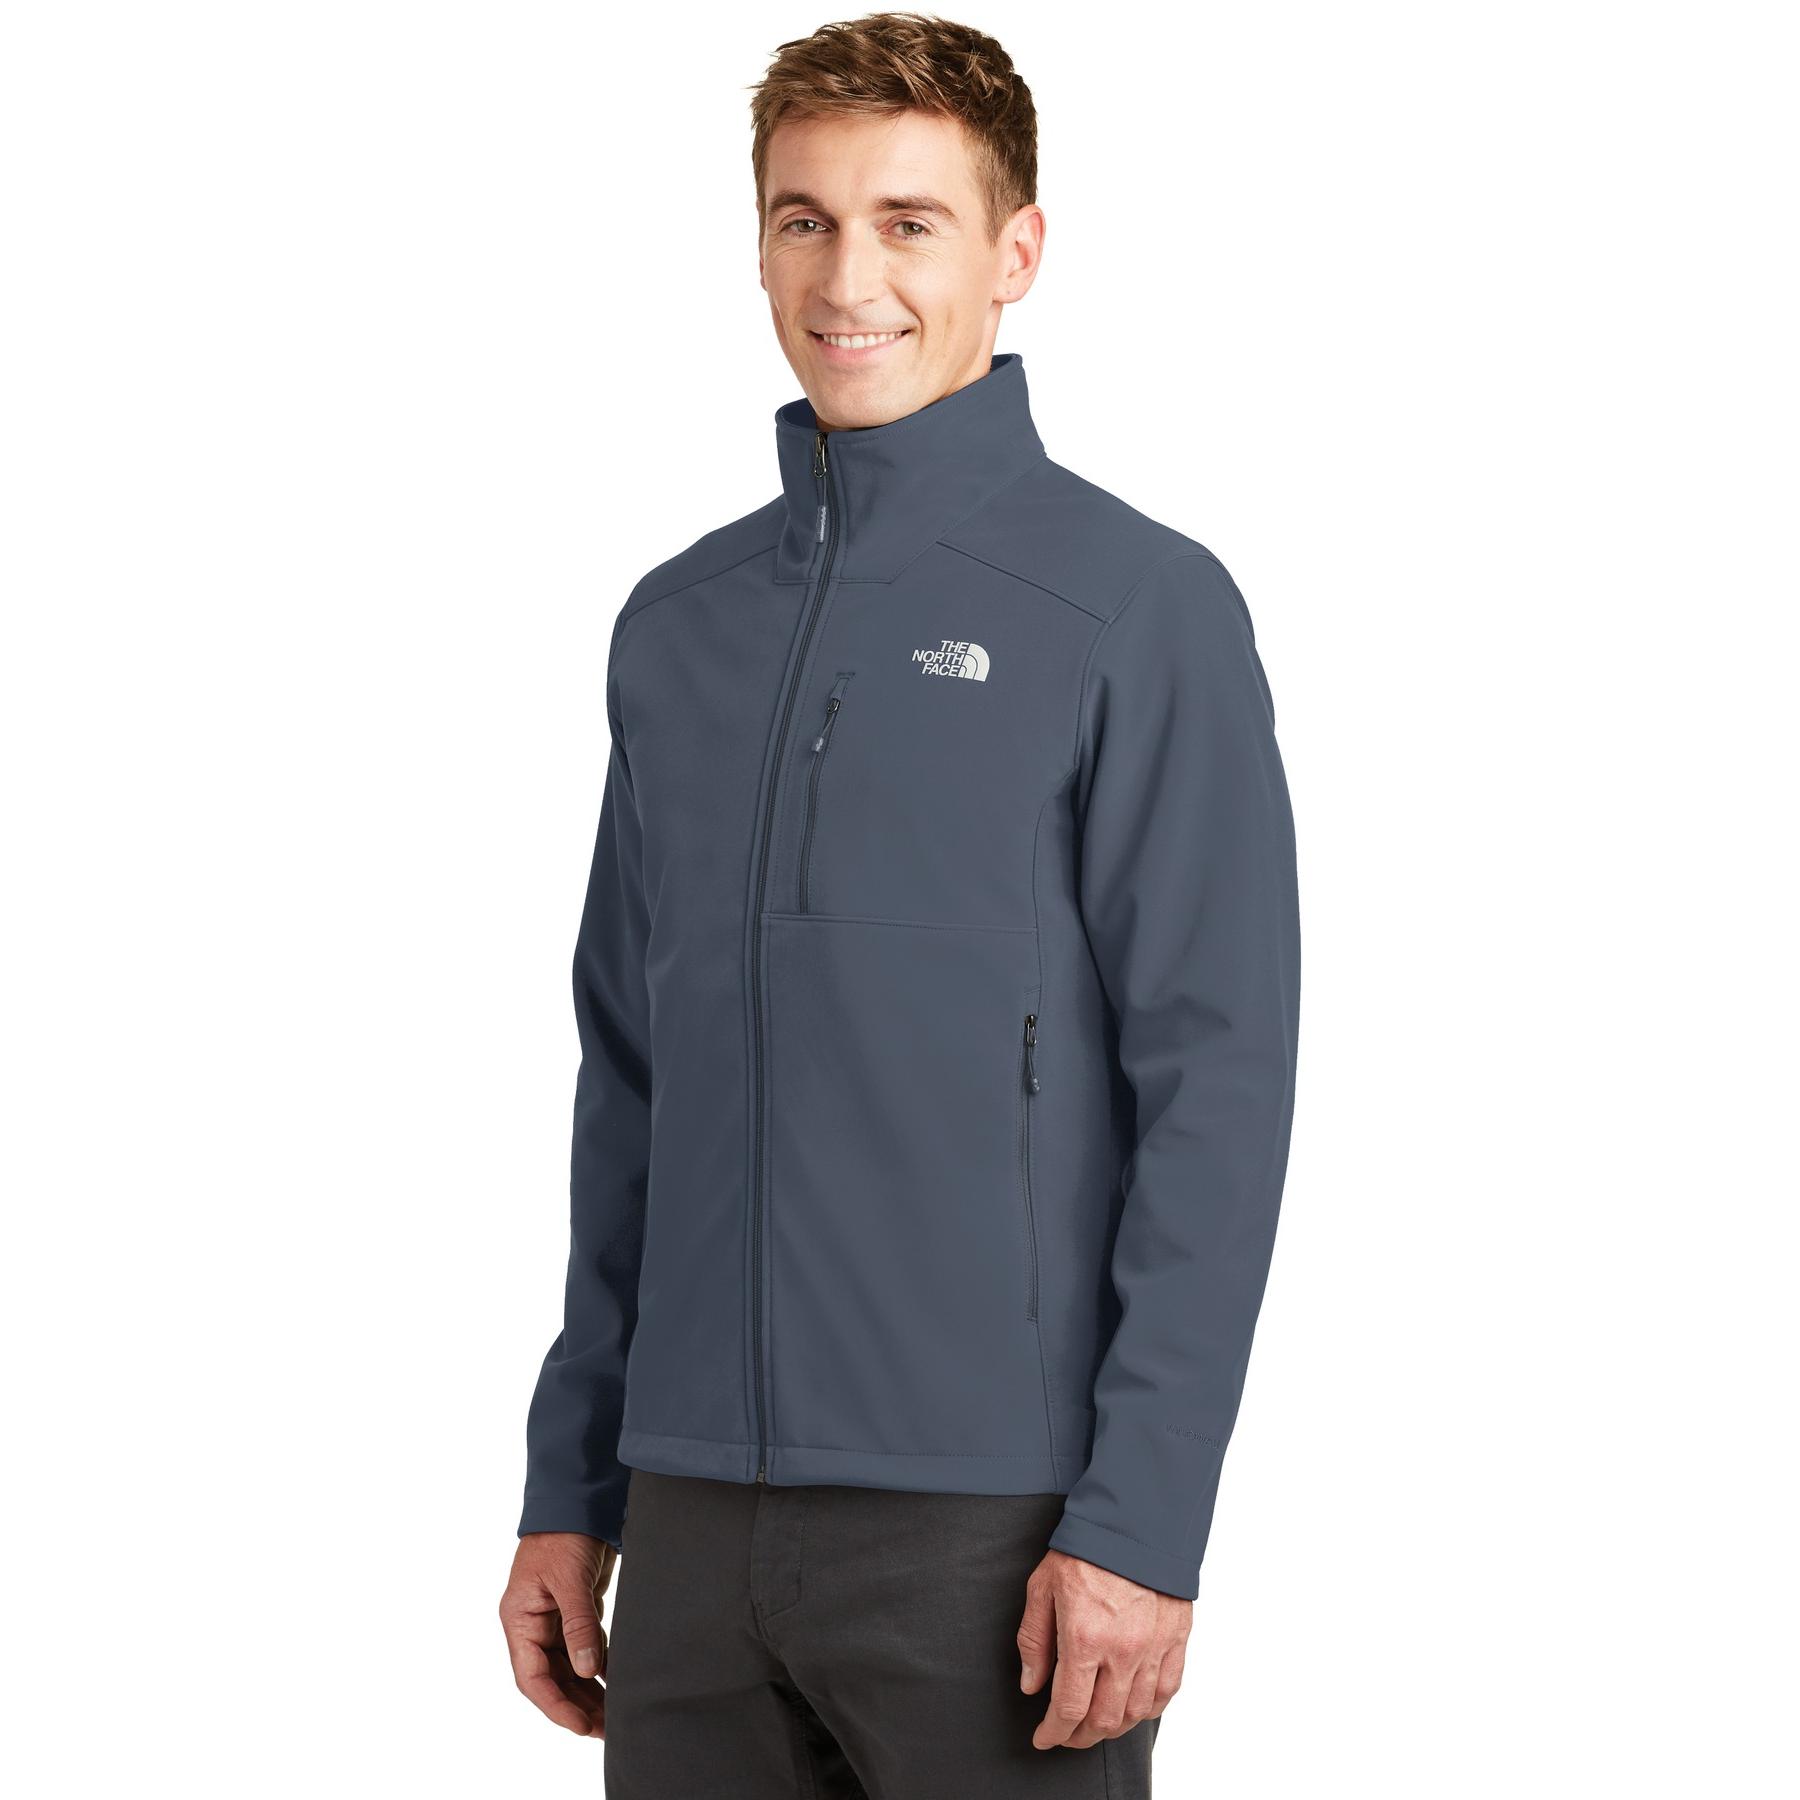 The North Face NF0A3LGT Apex Barrier Soft Shell Jacket - Urban Navy